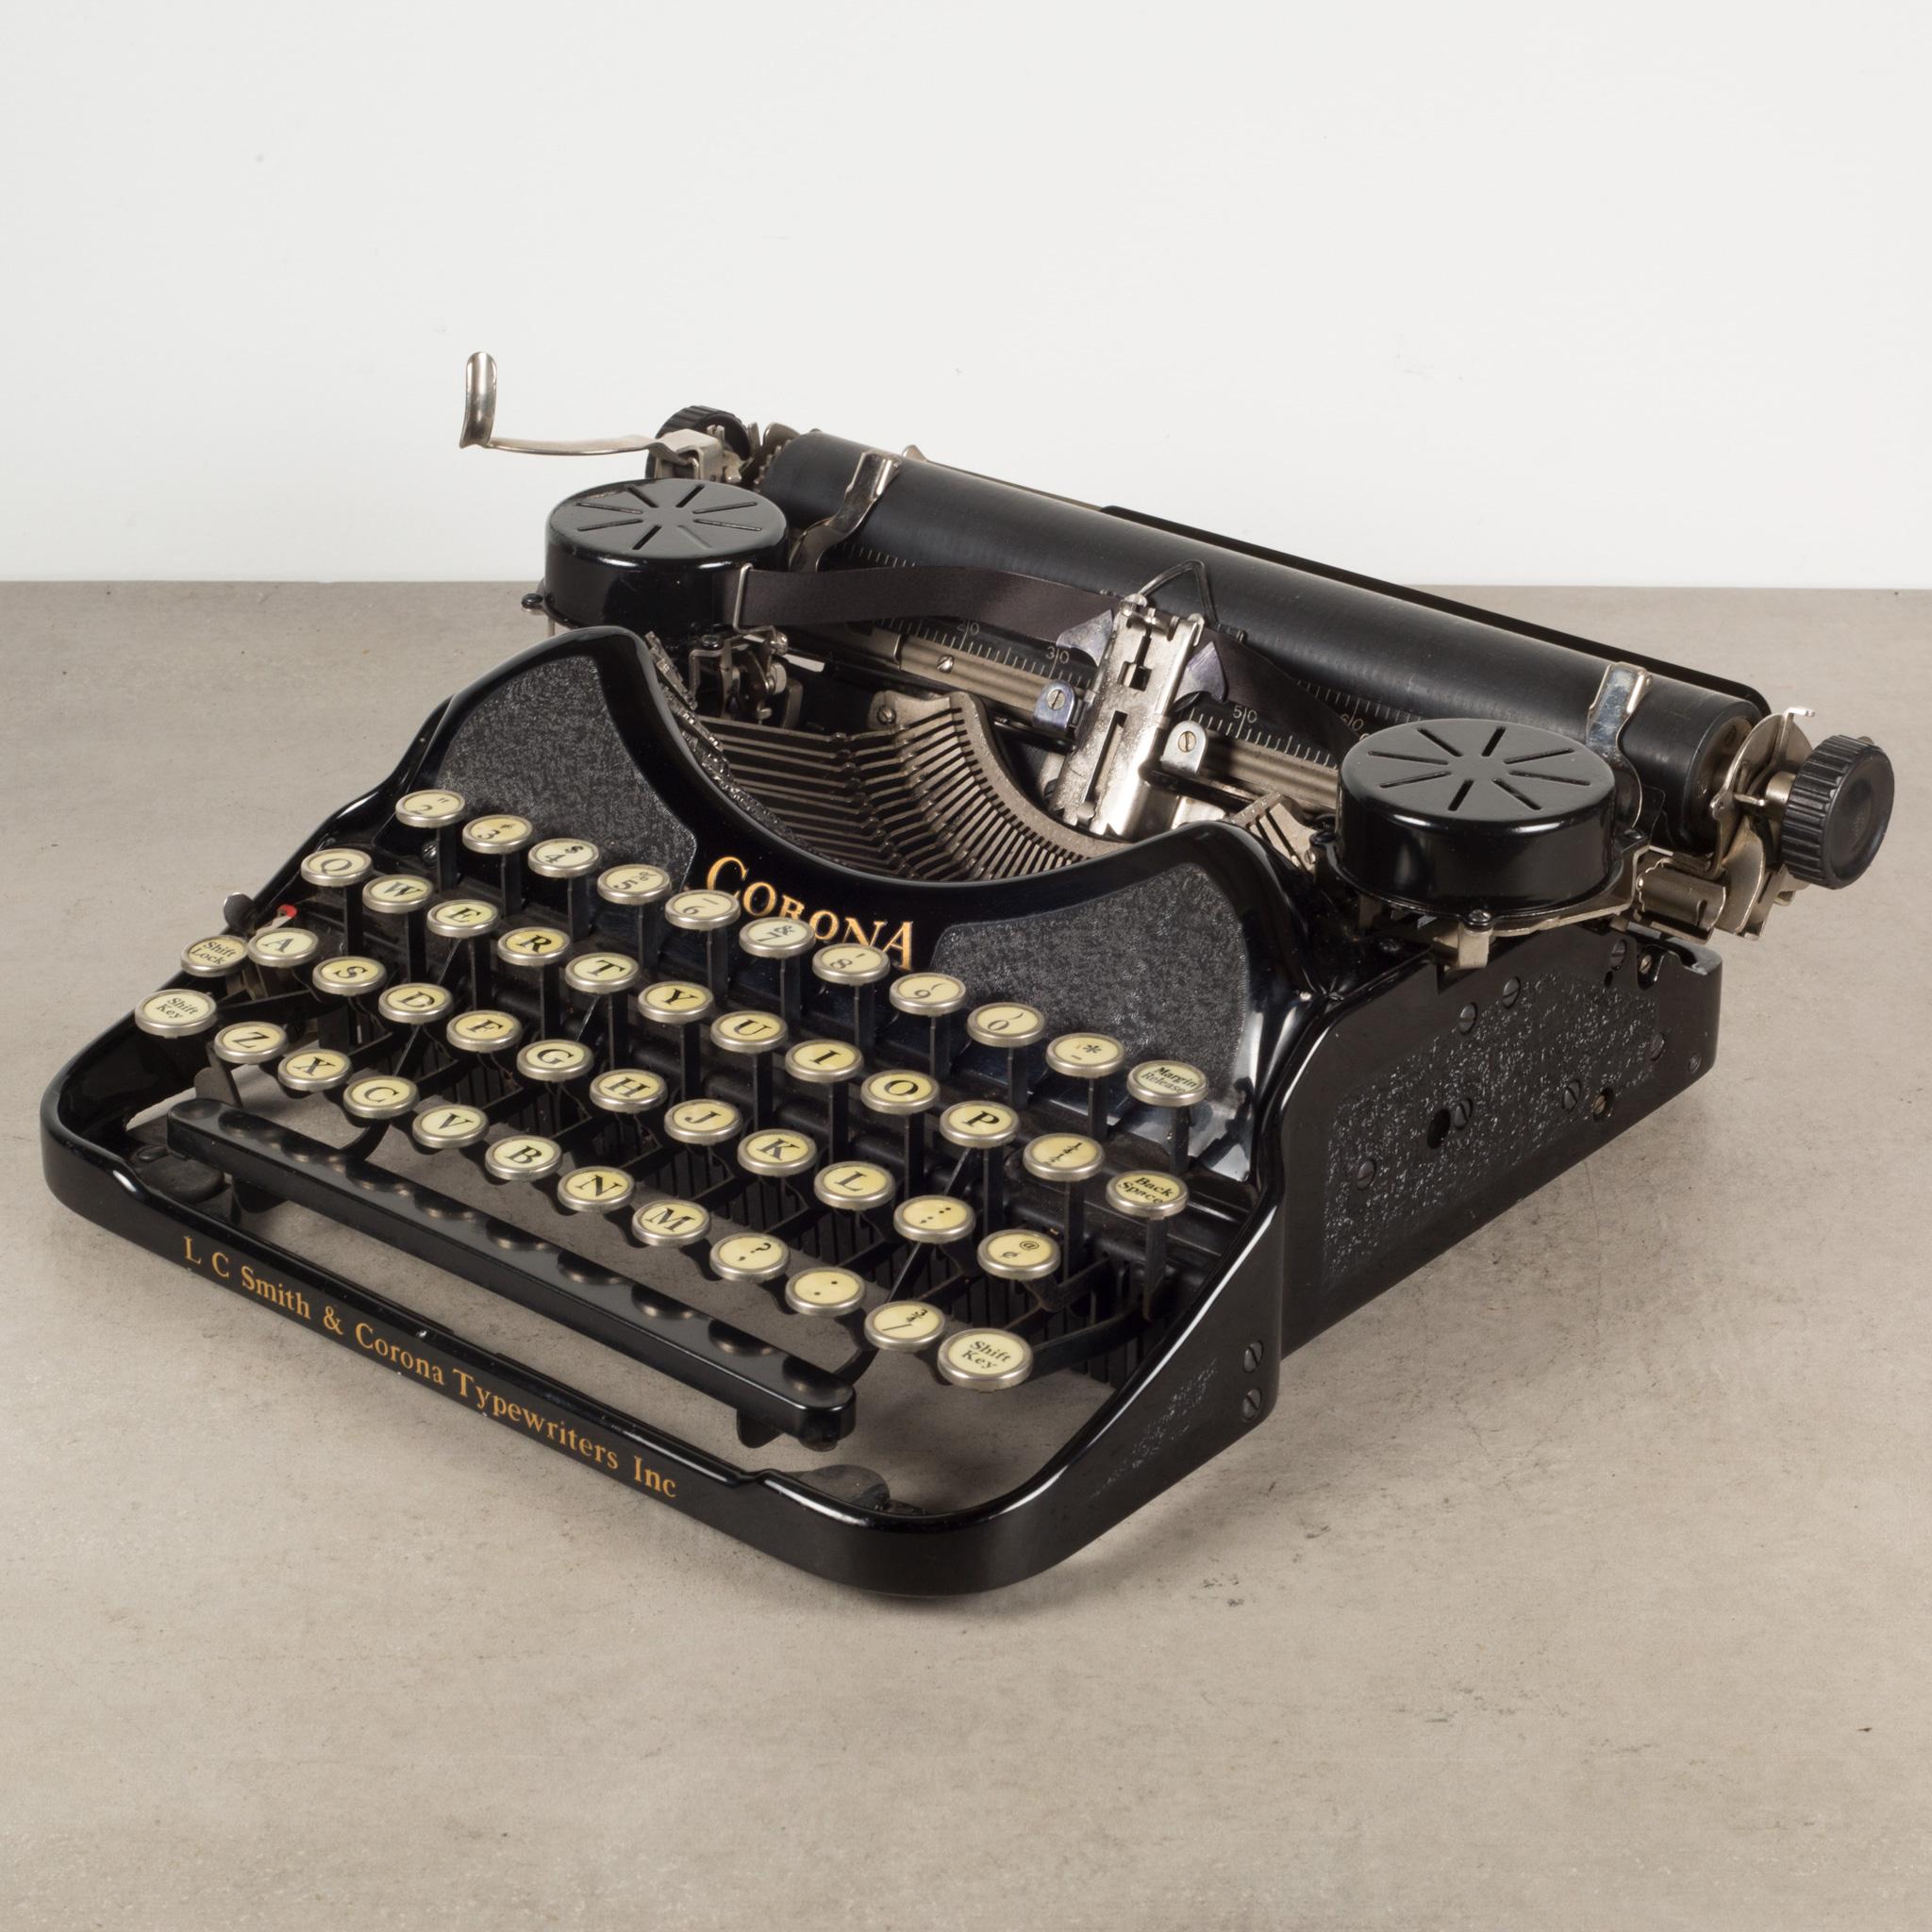 ABOUT

An Art Deco refurbished portable Corona Four bank typewriter with panels of contrasting crackle finish and high gloss black, original gold lettering and original case. The keys are nickle with pale yellow porcelain interior and black